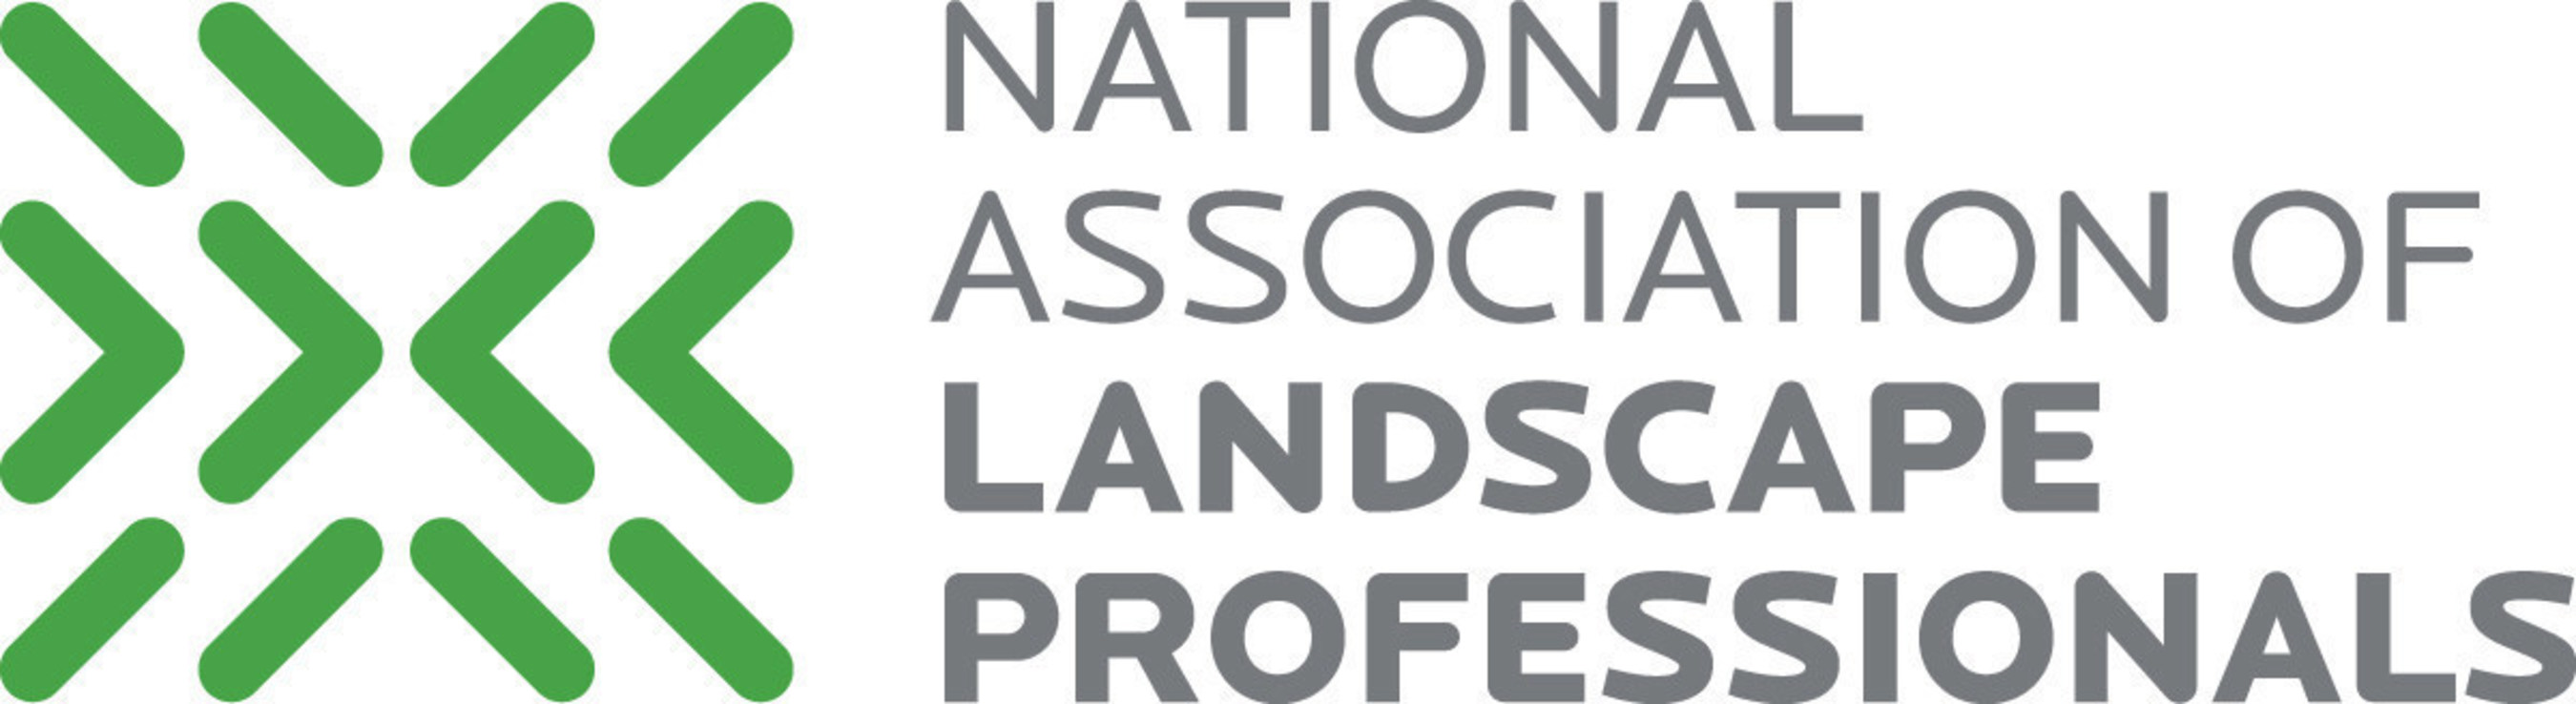 The National Association of Landscape Professionals will continue to provide business and safety education to its members, certification through the Landscape Industry Certified designation, as well as lobbying on behalf of the industry with lawmakers and promoting the industry to the public. But, it also will now focus on a reinvigorated commitment to advocacy, spotlighting the professionalism of its members, providing the public with the best, most trusted source of landscape and lawn care information, and promoting the value of using professional landscape industry services. Get more information at www.landscapeprofessionals.org.